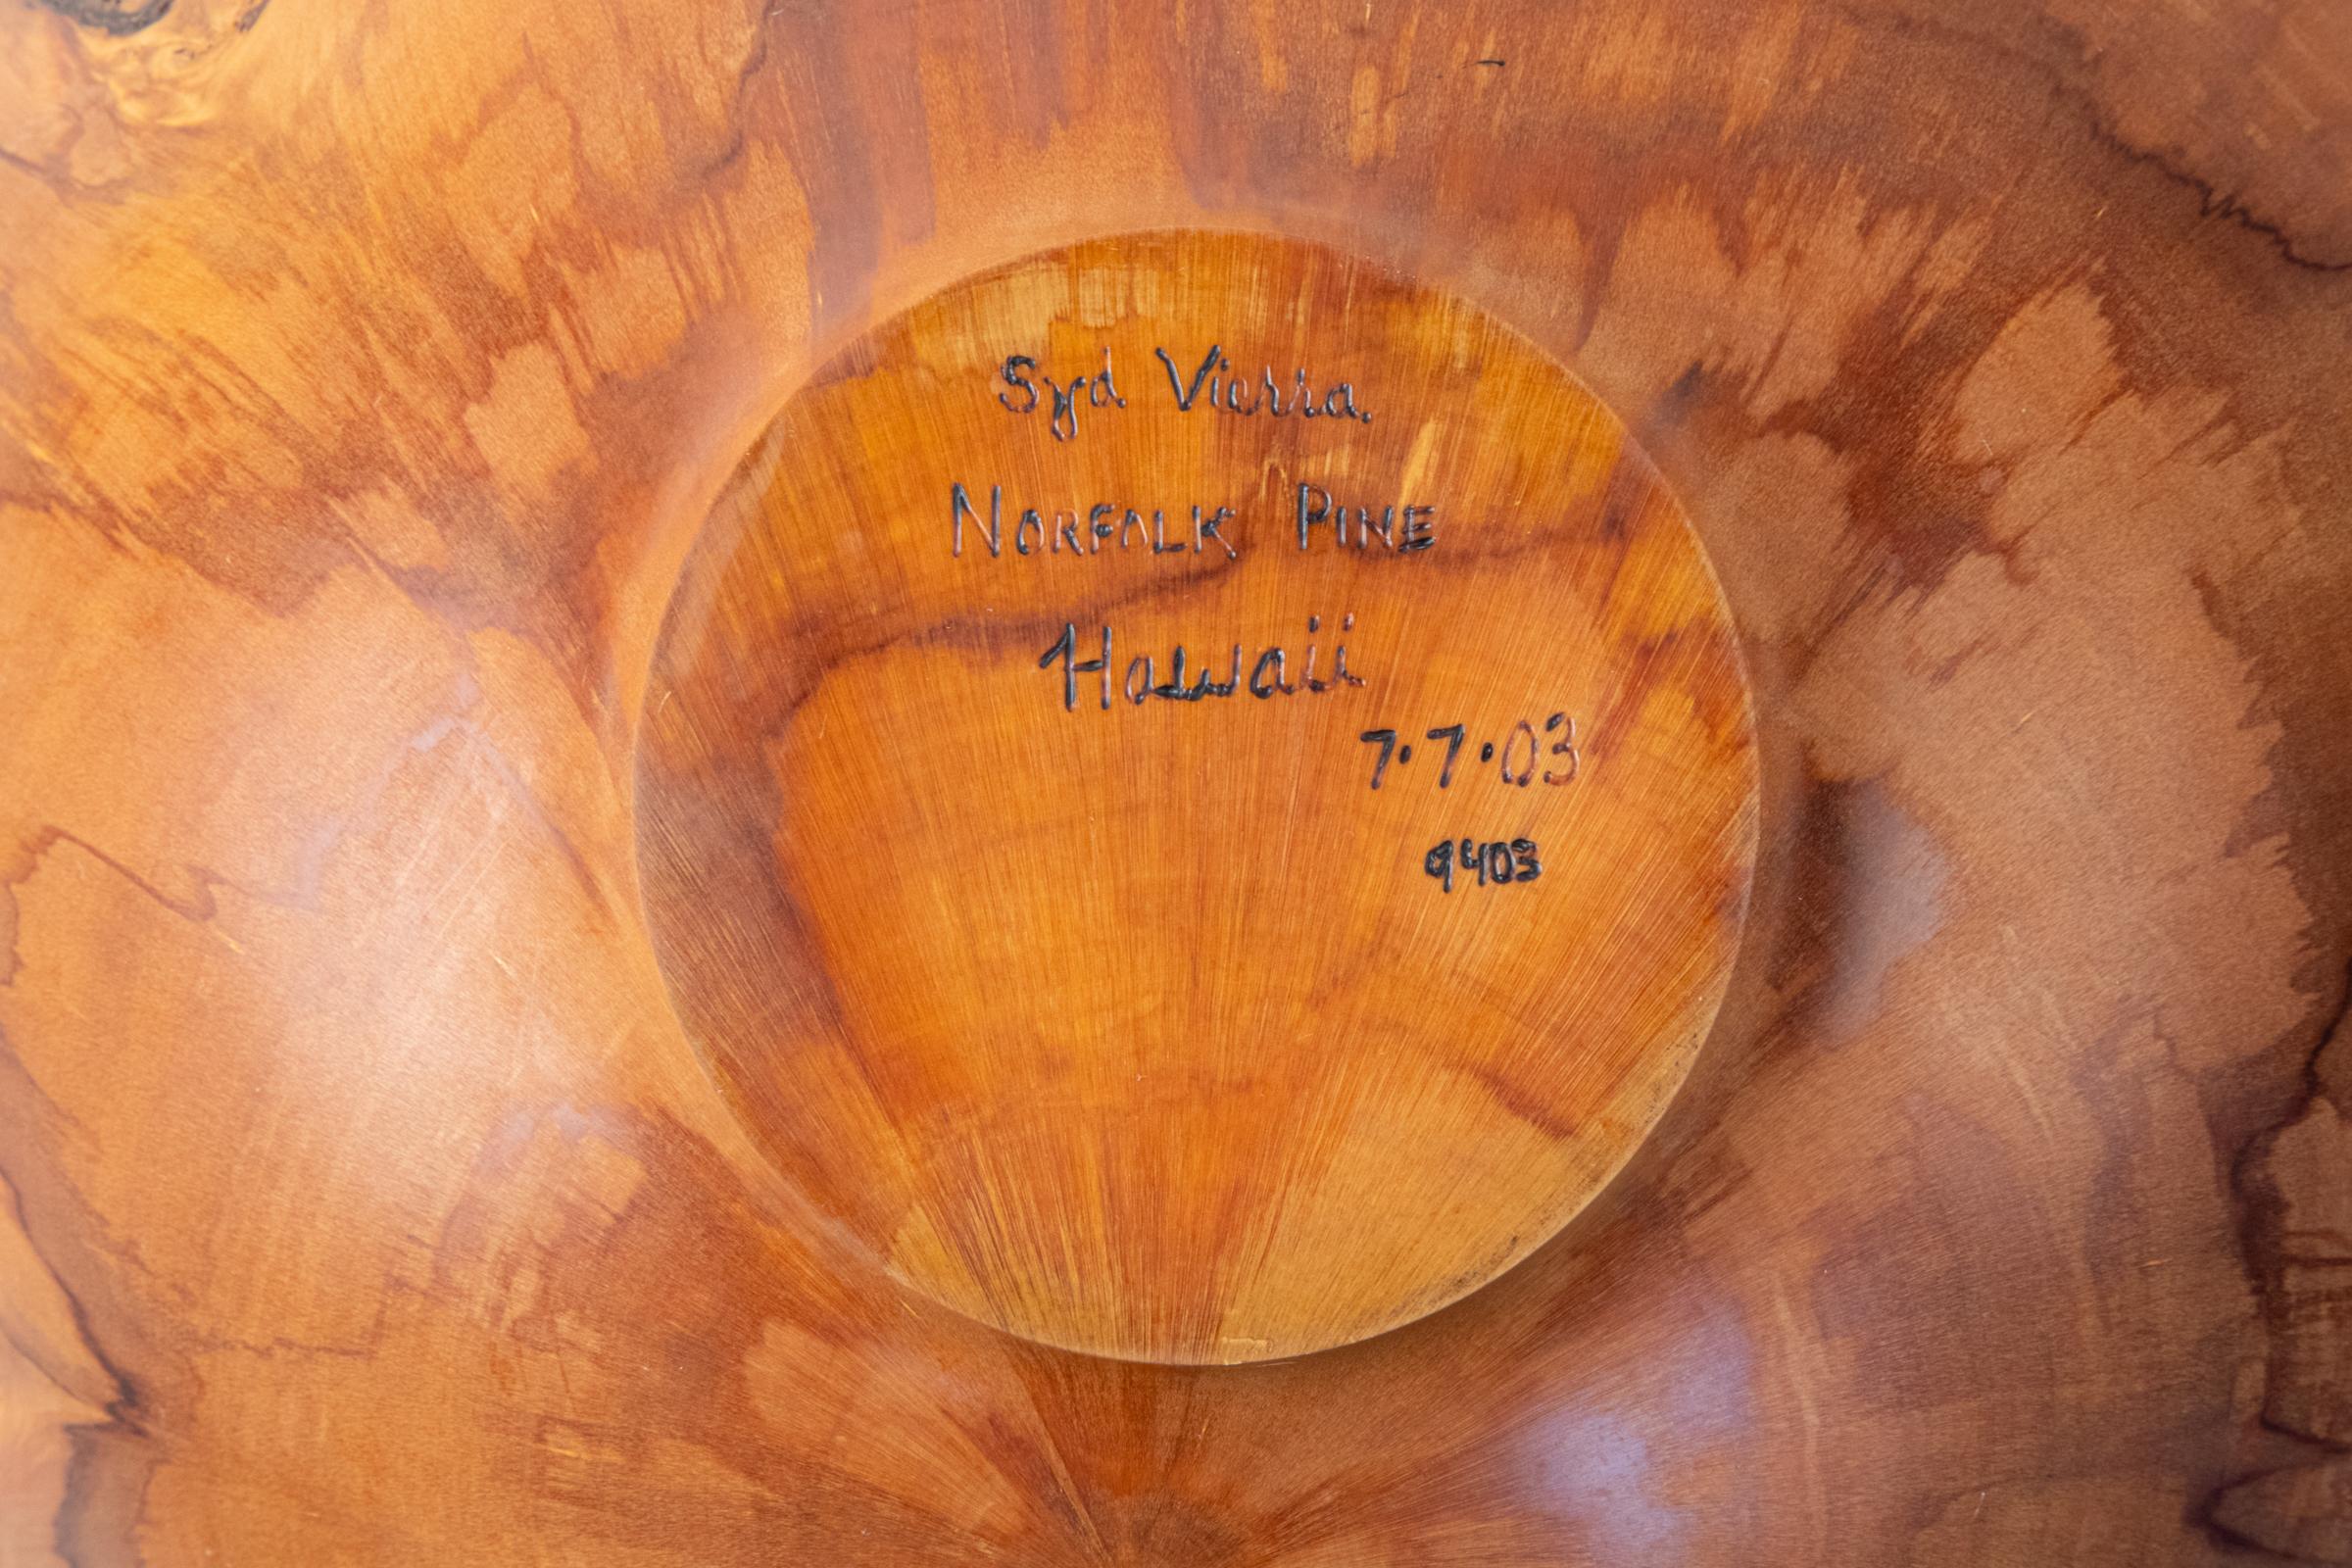 Large Hawaiian Turned Wood Art Bowl by Syd Vierra For Sale 8